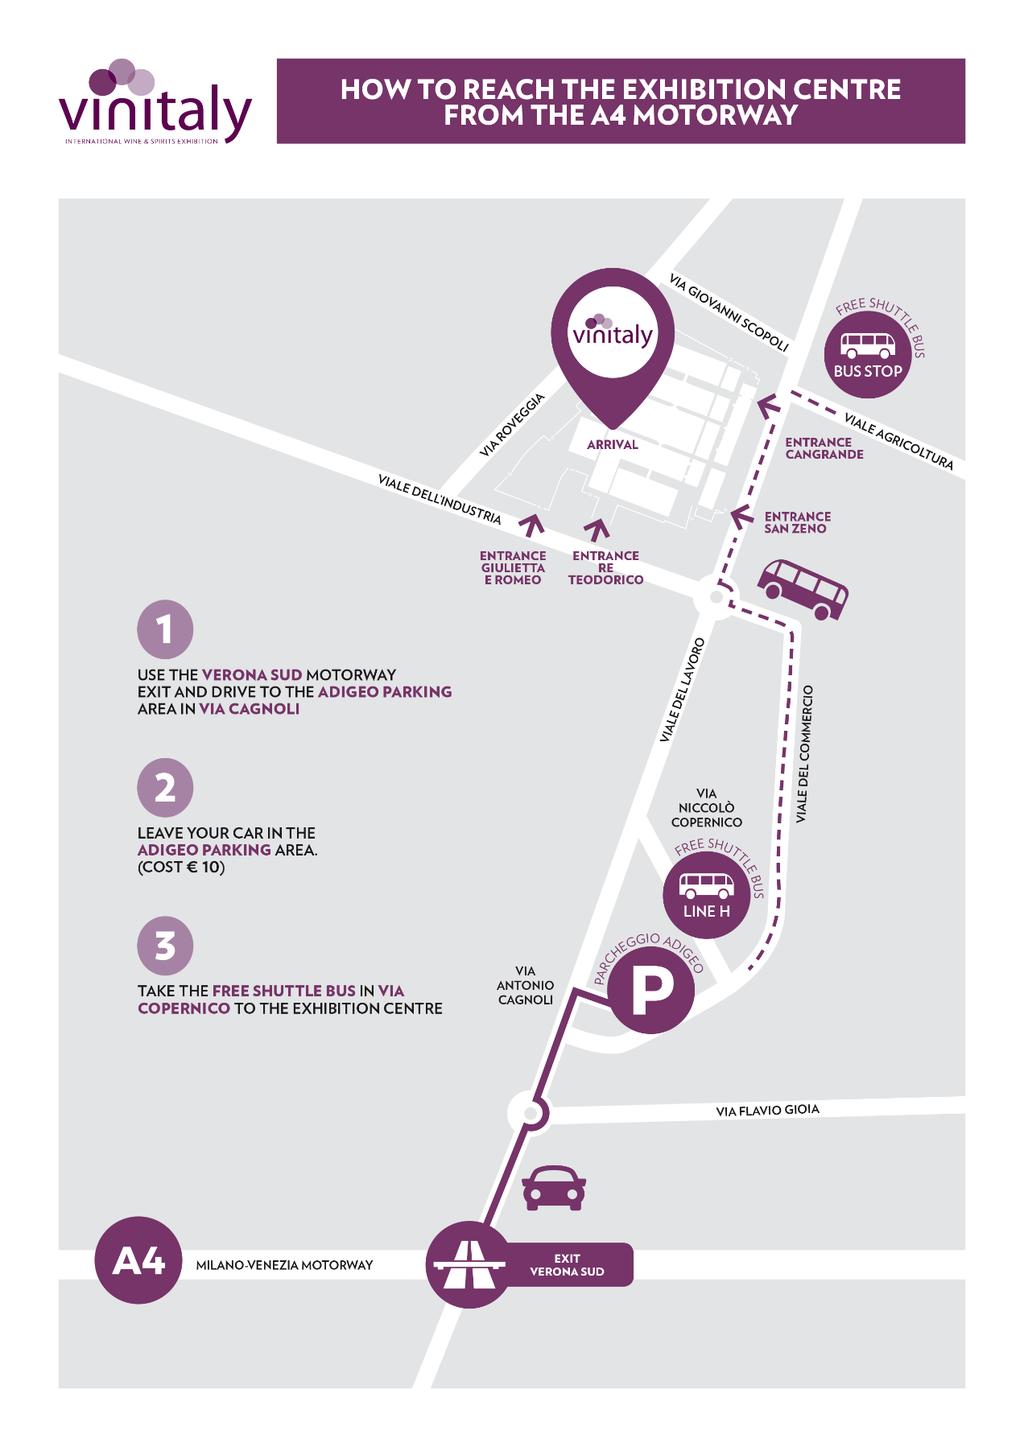 TRAFFIC, PARKING & TRANSPORT GUIDE HOW TO REACH THE EXHIBITION CENTRE By train Travelling by train has always been the mst cnvenient, fast and sustainable way t reach Vinitaly.